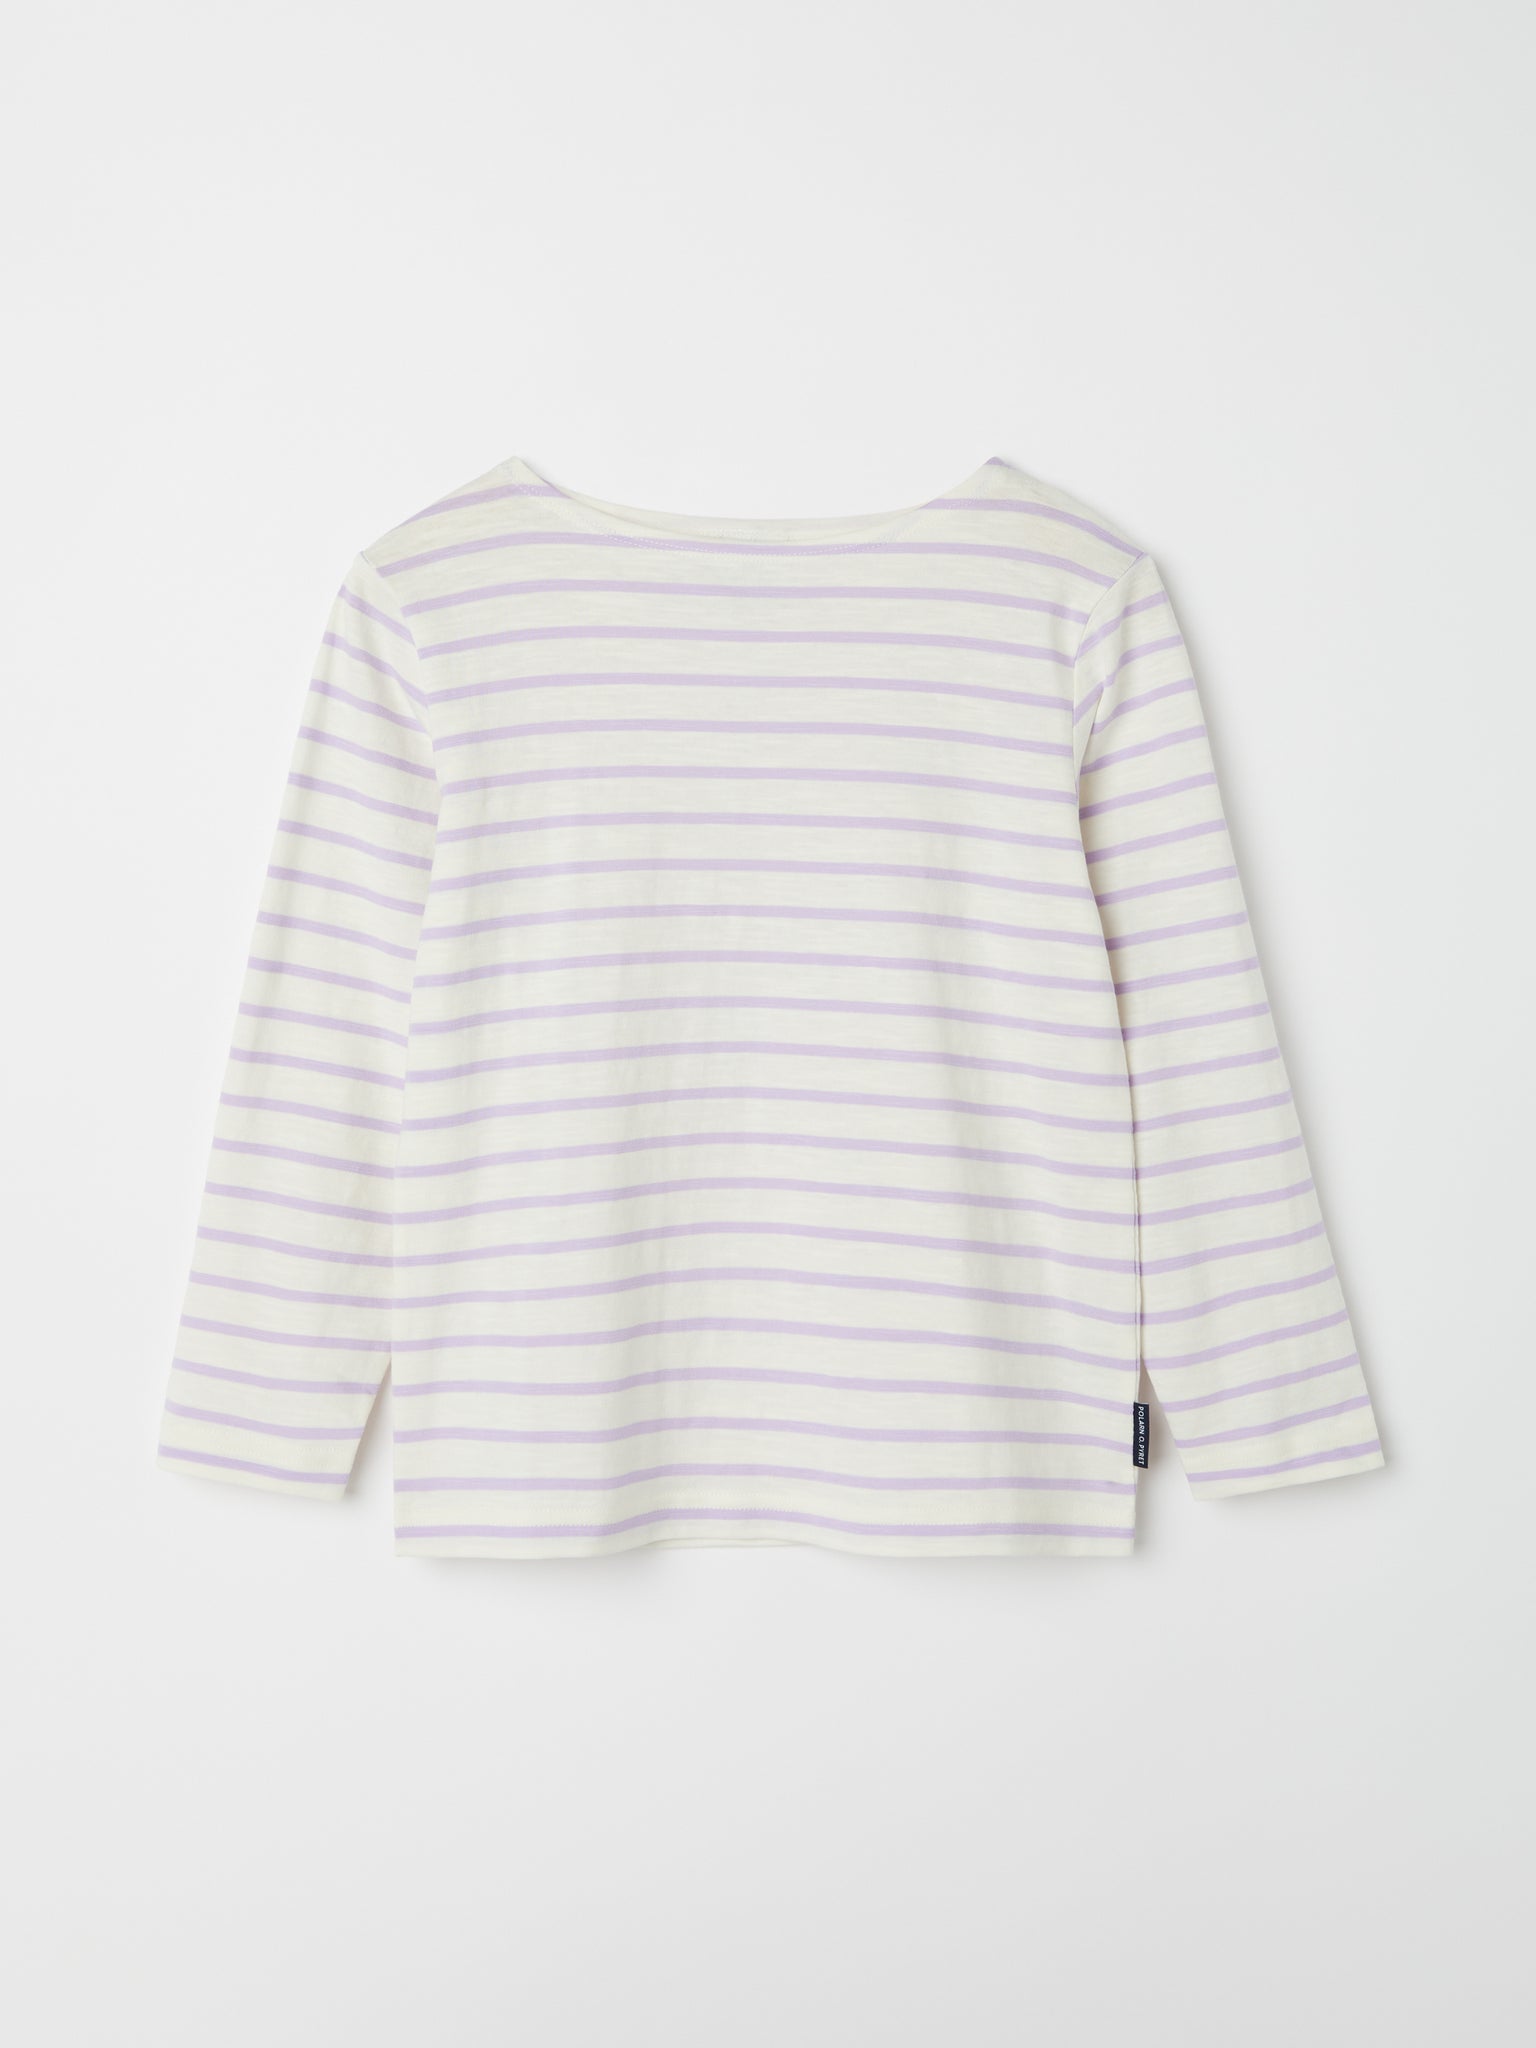 Lilac Breton Stipe Kids Top from the Polarn O. Pyret kidswear collection. Nordic kids clothes made from sustainable sources.